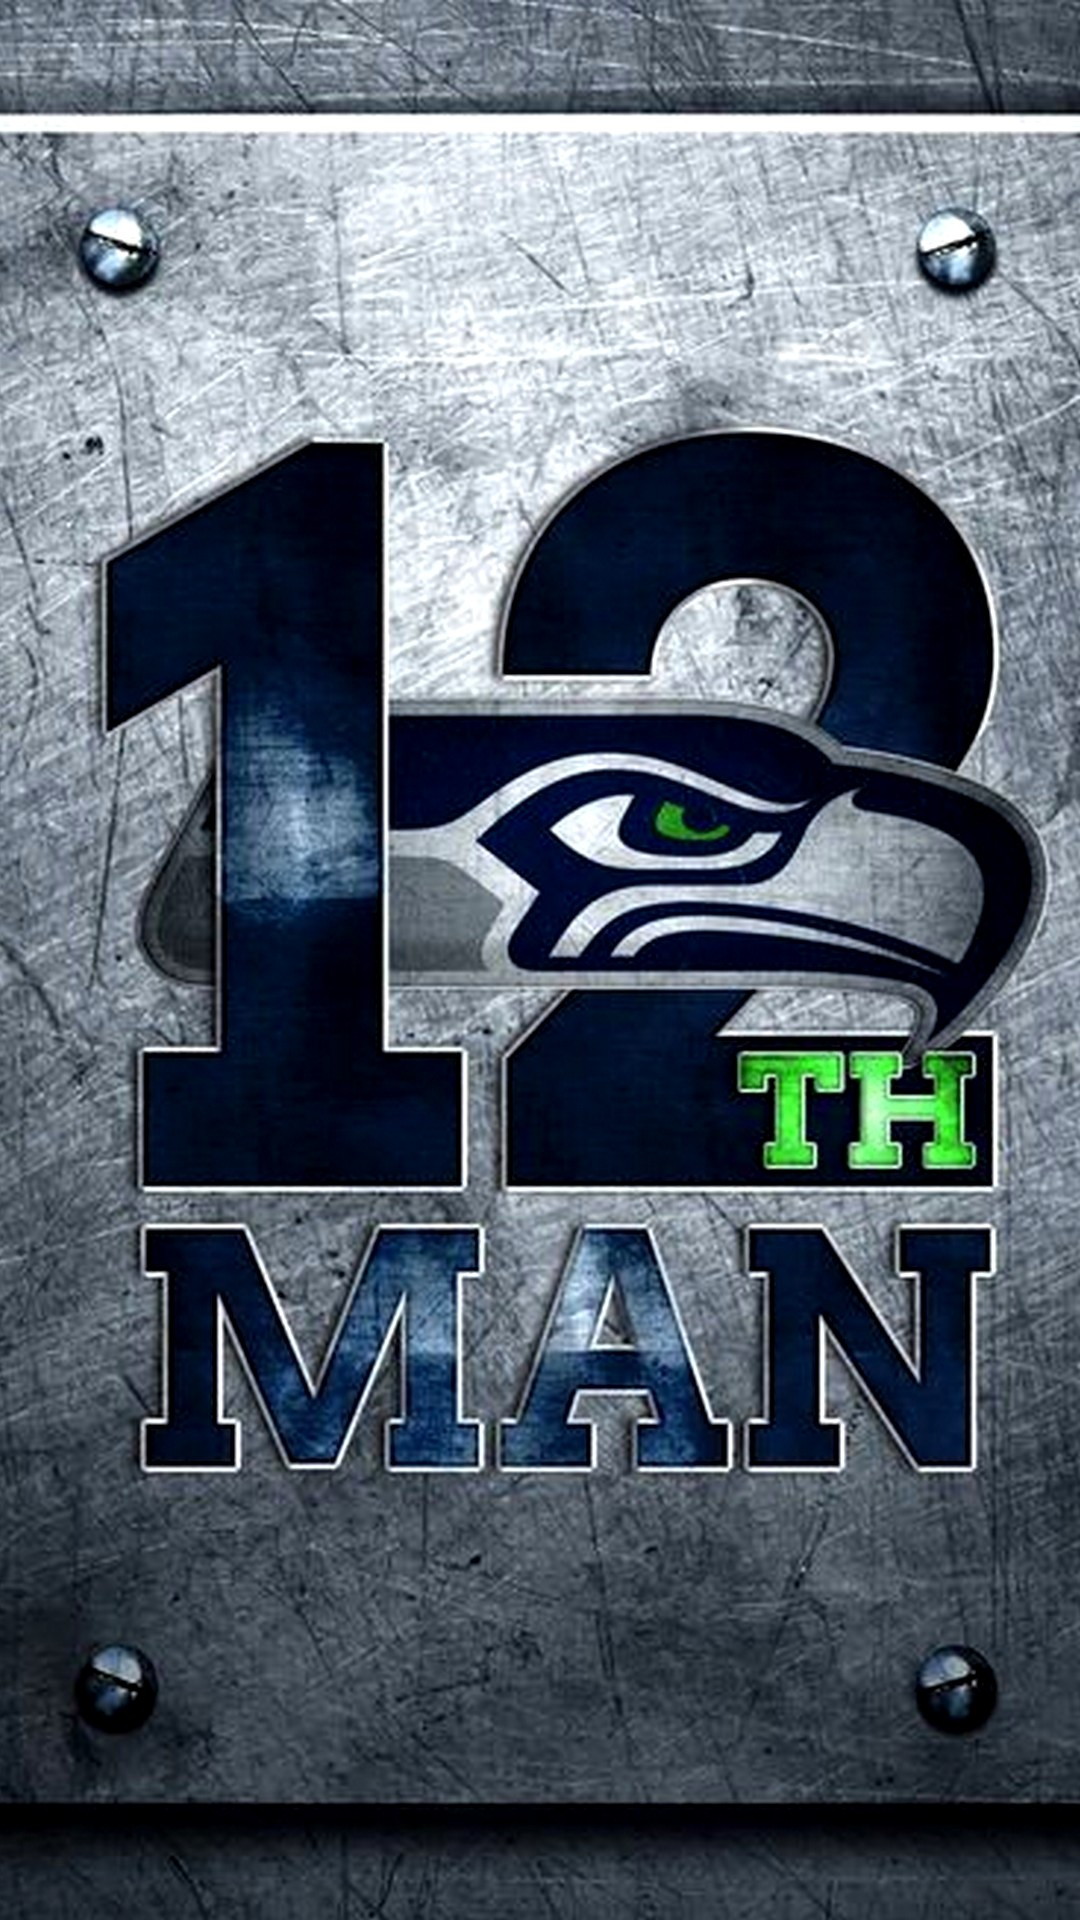 Seattle Seahawks HD Wallpaper For iPhone with high-resolution 1080x1920 pixel. You can use this wallpaper for your Mac or Windows Desktop Background, iPhone, Android or Tablet and another Smartphone device